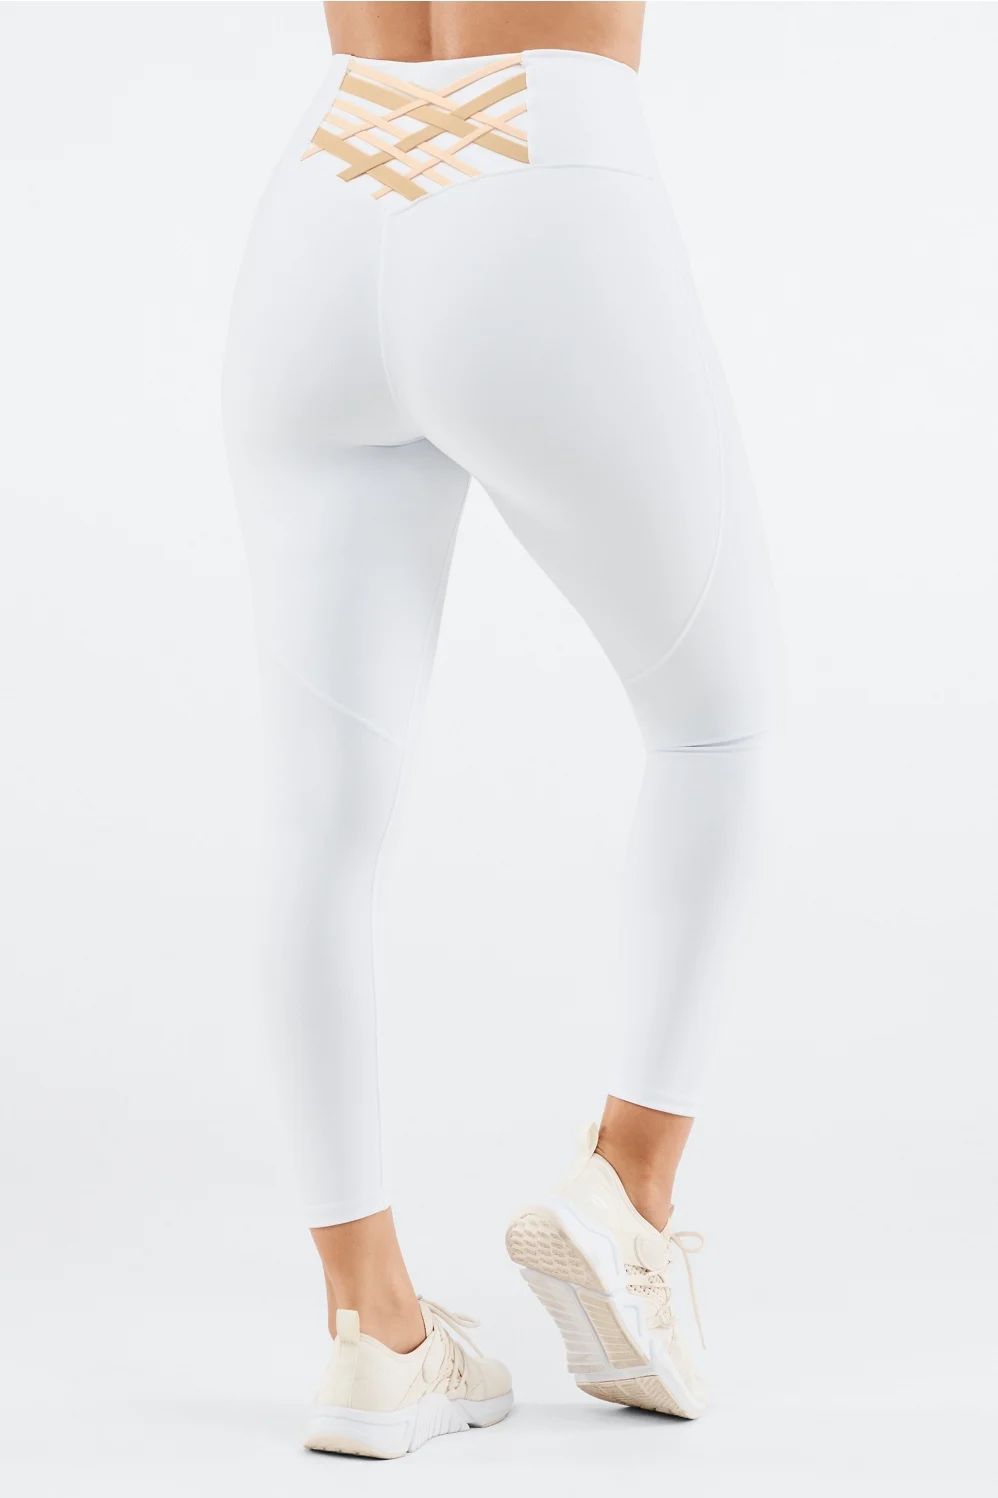 The Boost II High-Waisted Strappy 7/8 | Fabletics - North America